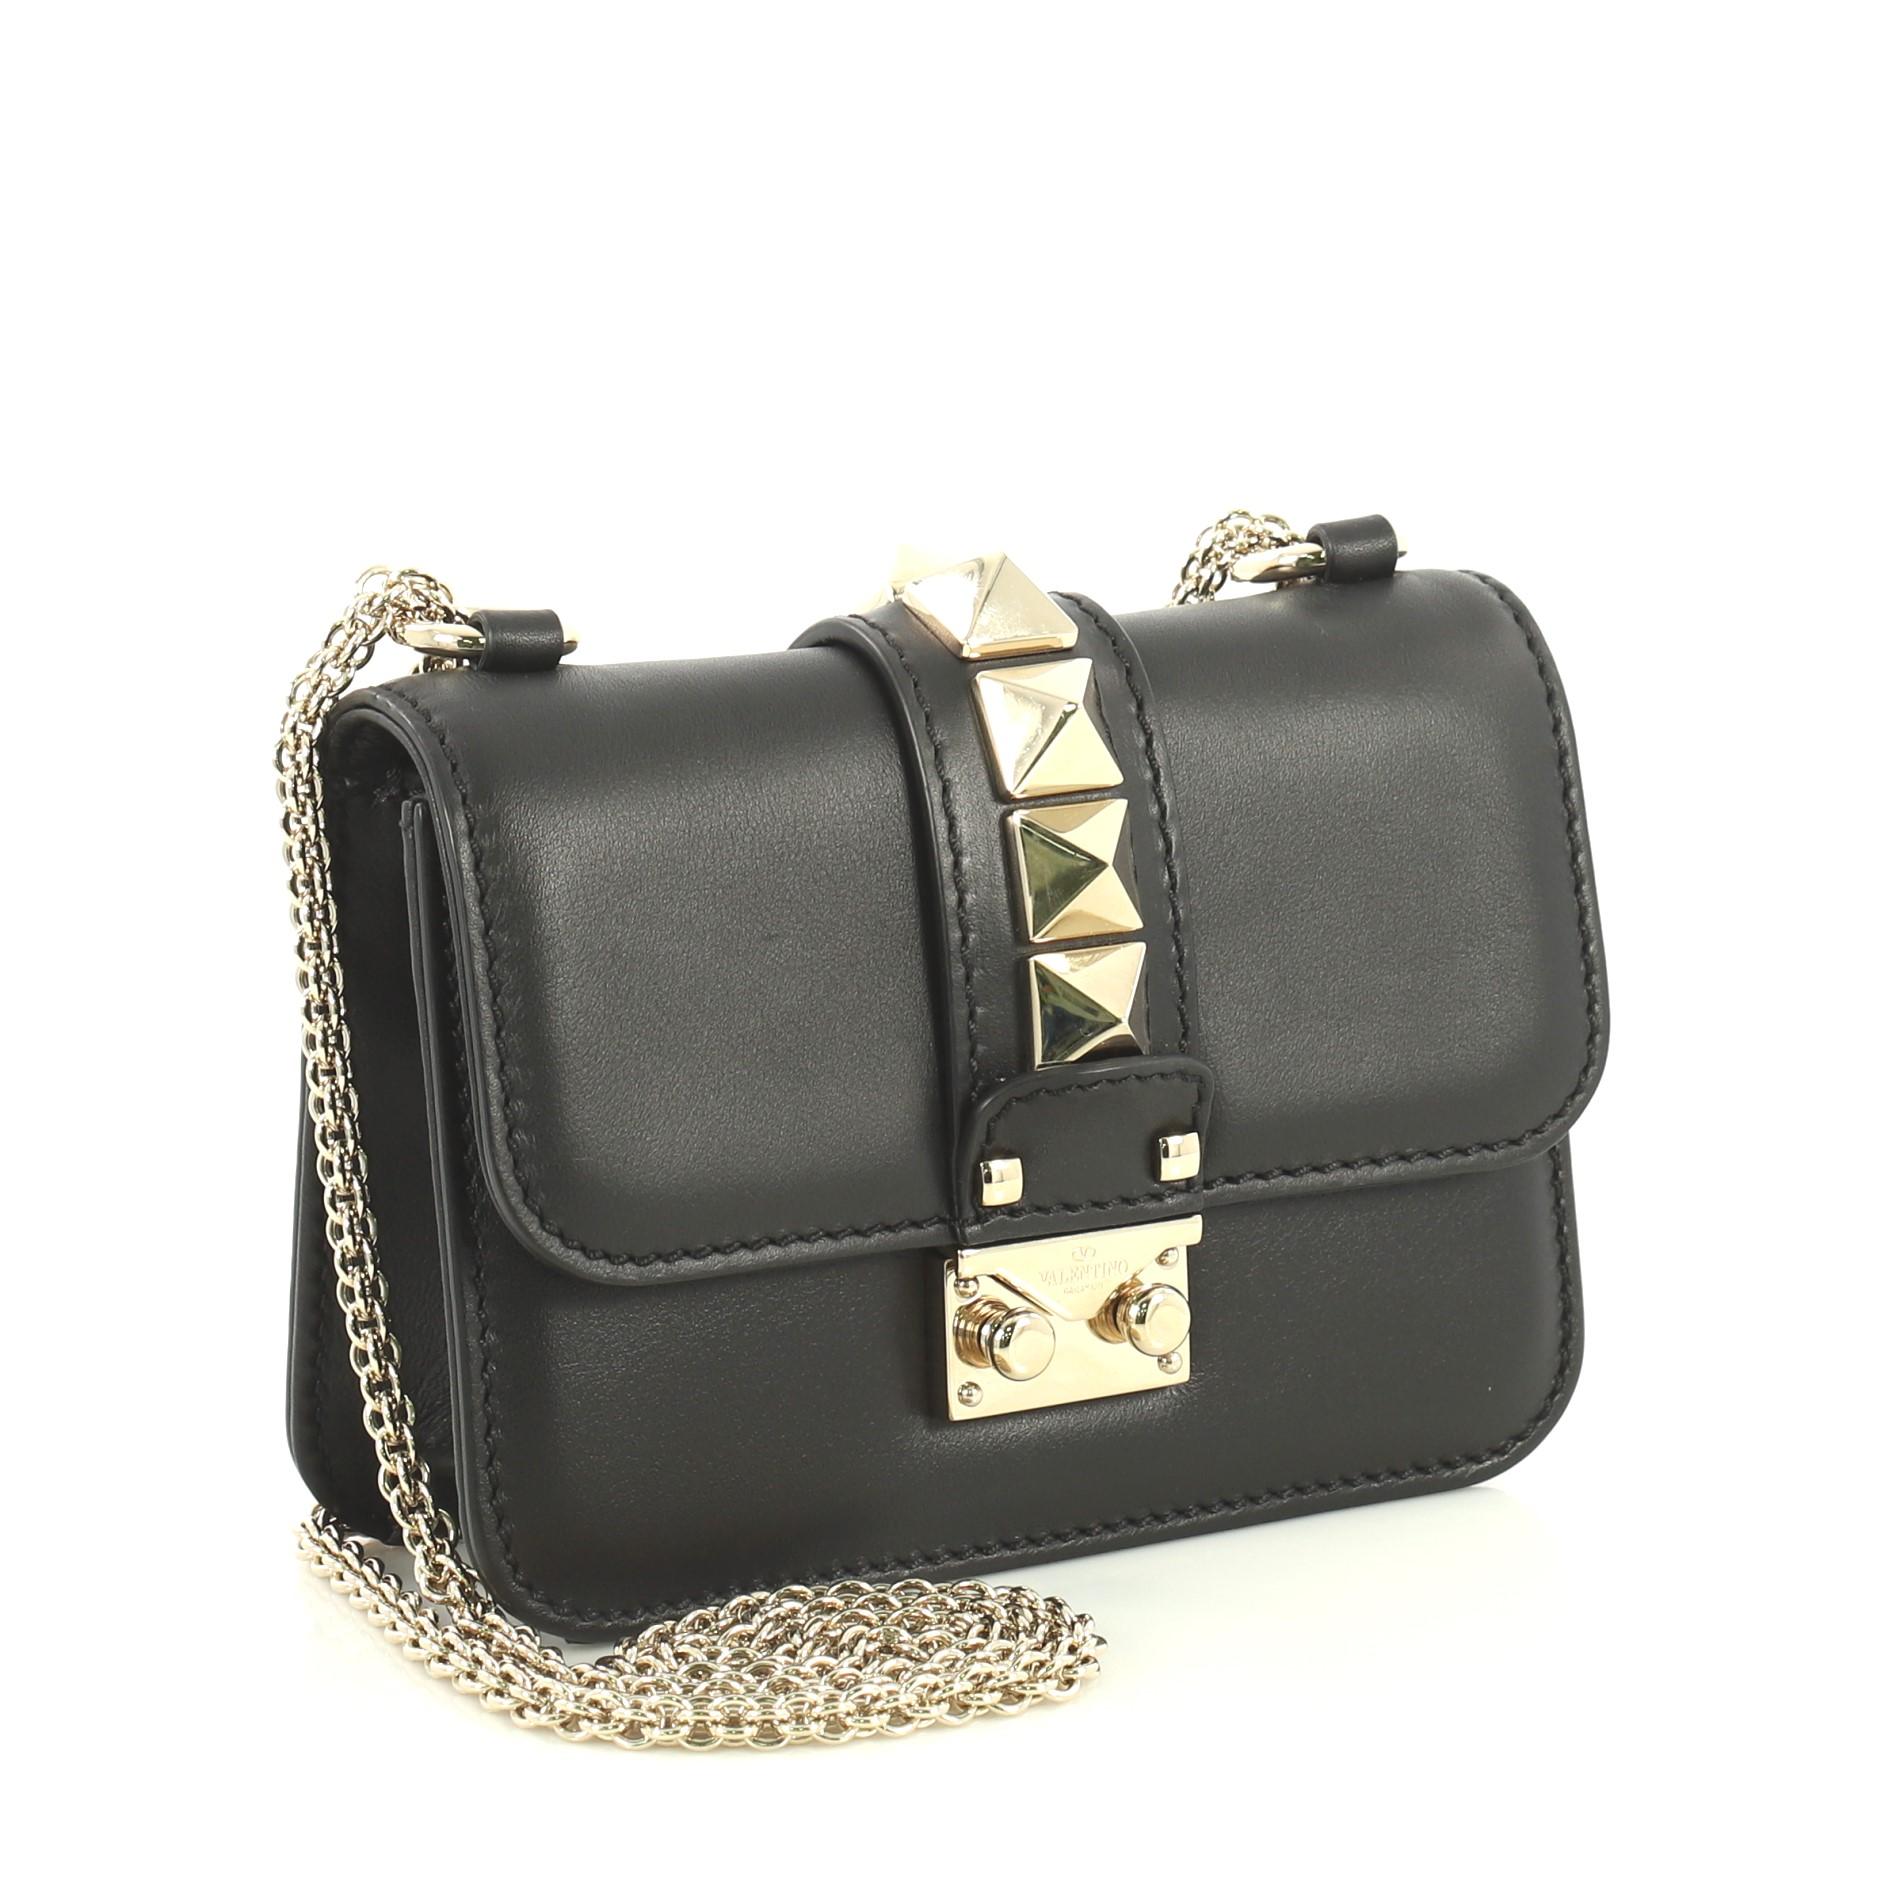 This Valentino Glam Lock Shoulder Bag Leather Mini, crafted from black leather, features a long detachable chain strap, pyramid studs at the center, and gold-tone hardware. Its push-lock closure opens to a black fabric interior with slip pocket.